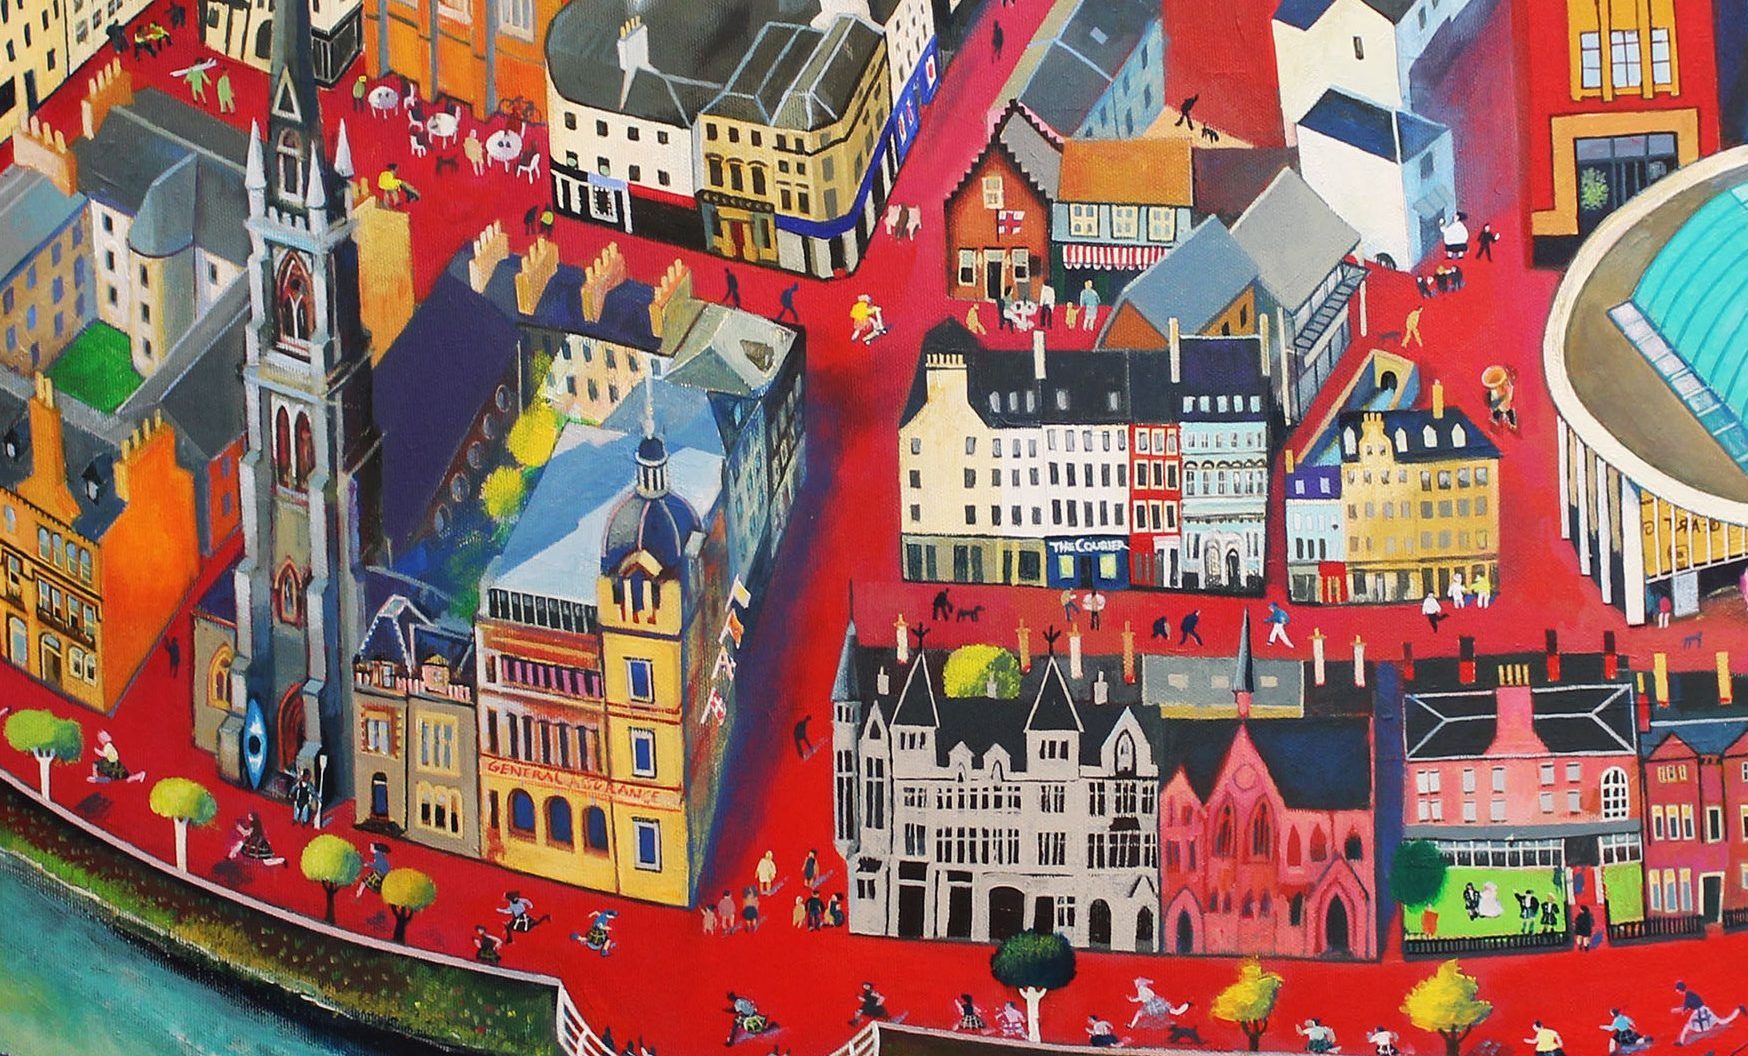 Part of the painting by Rob Hain showing the Courier office and Rev Scott Burton